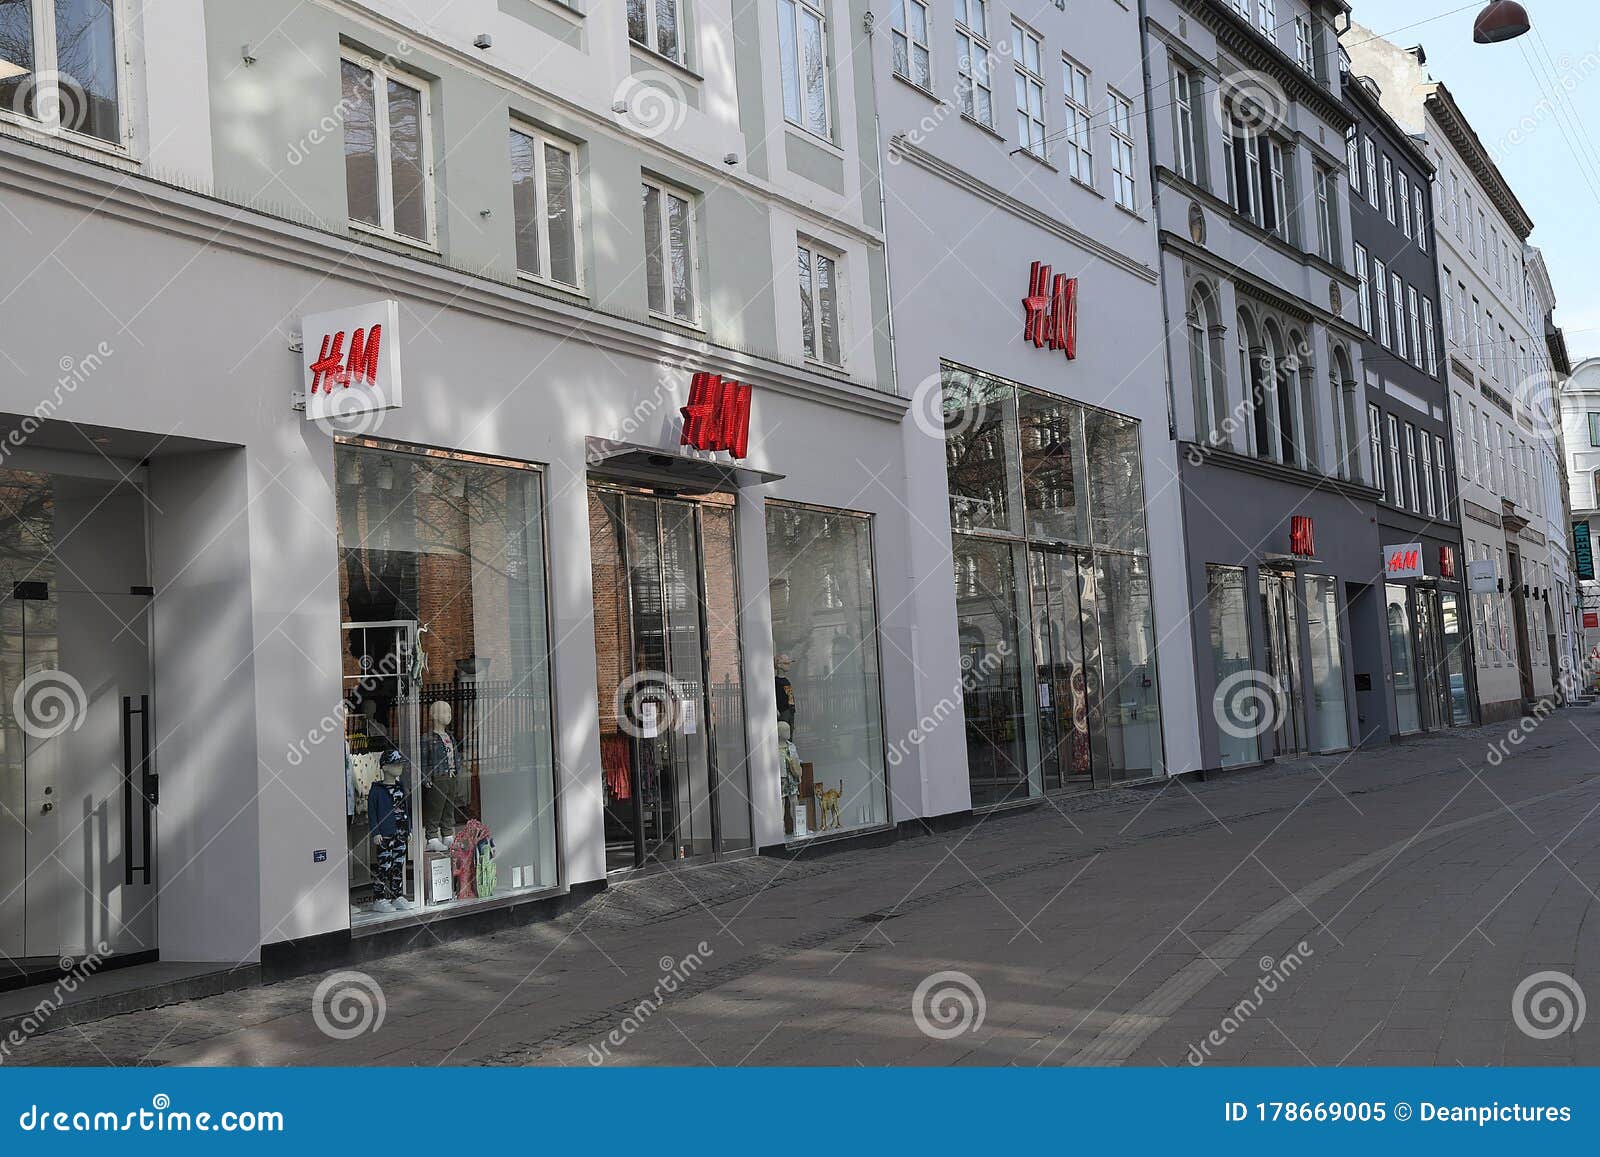 Swedish Retail Chain H&M is Closed in Denmark Covid-19 Editorial Image - Image of danmark: